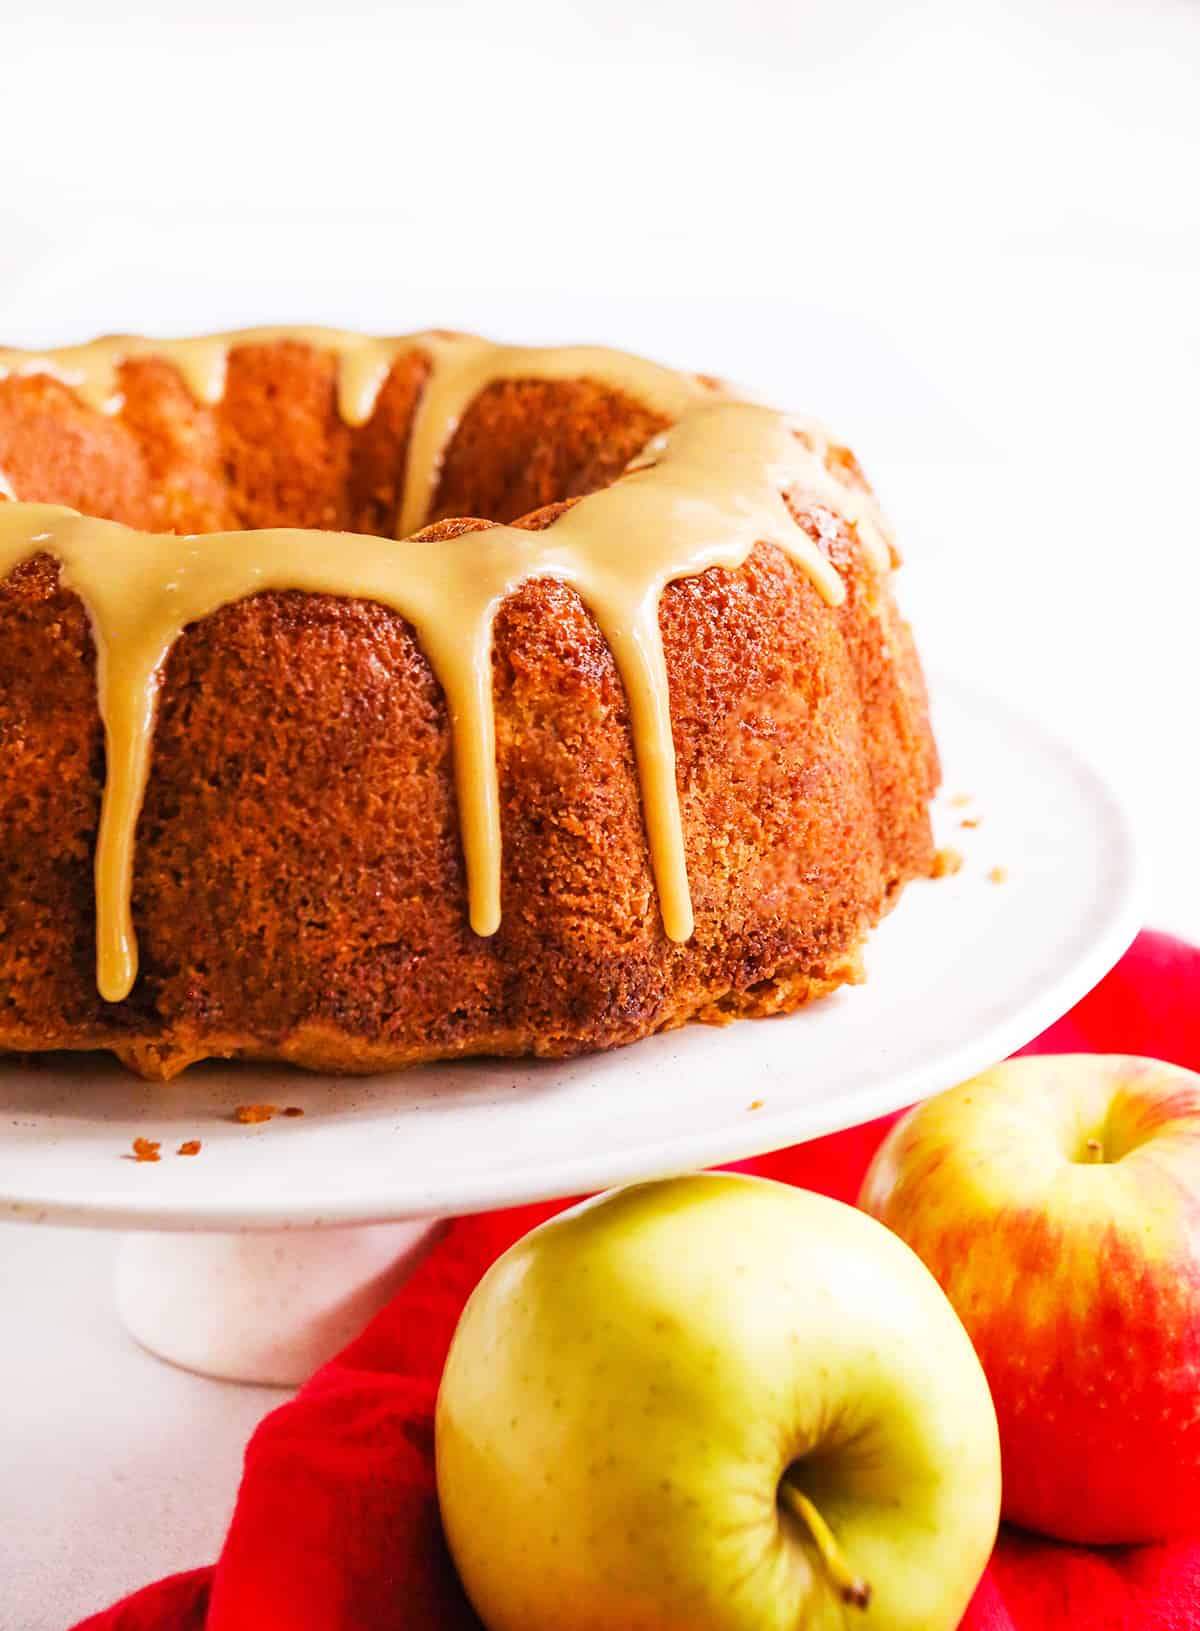 side view of an apple bundt cake with frosting on a cake display and apples on the table in front.